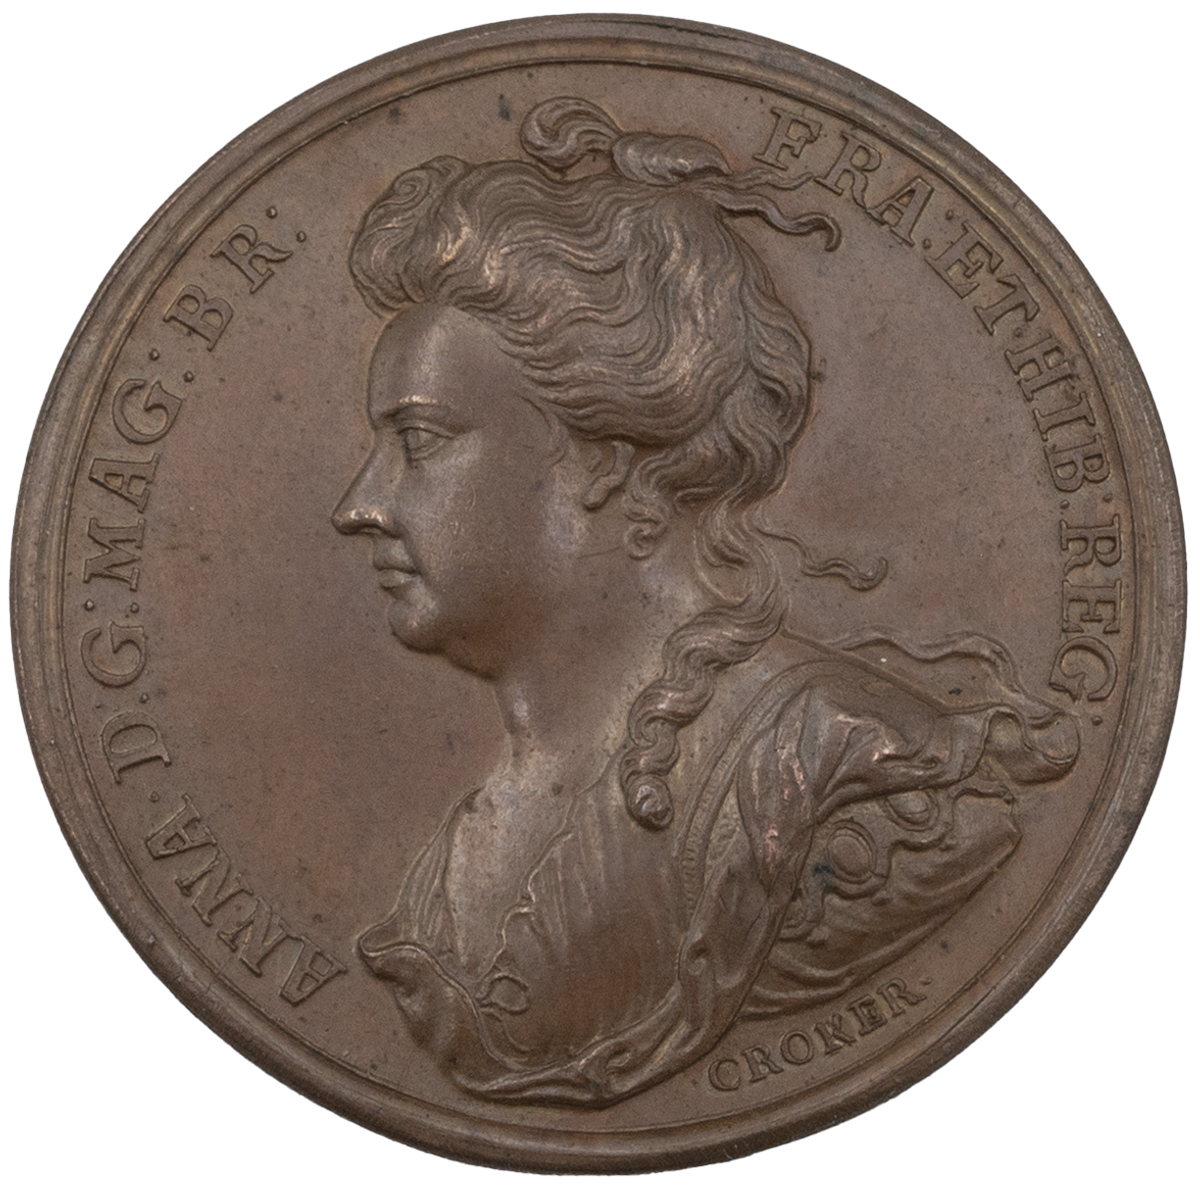 1704 Queen Anne Battle of Blenheim small bronze medal (Eimer 409). Obverse: draped, uncrowned bus...